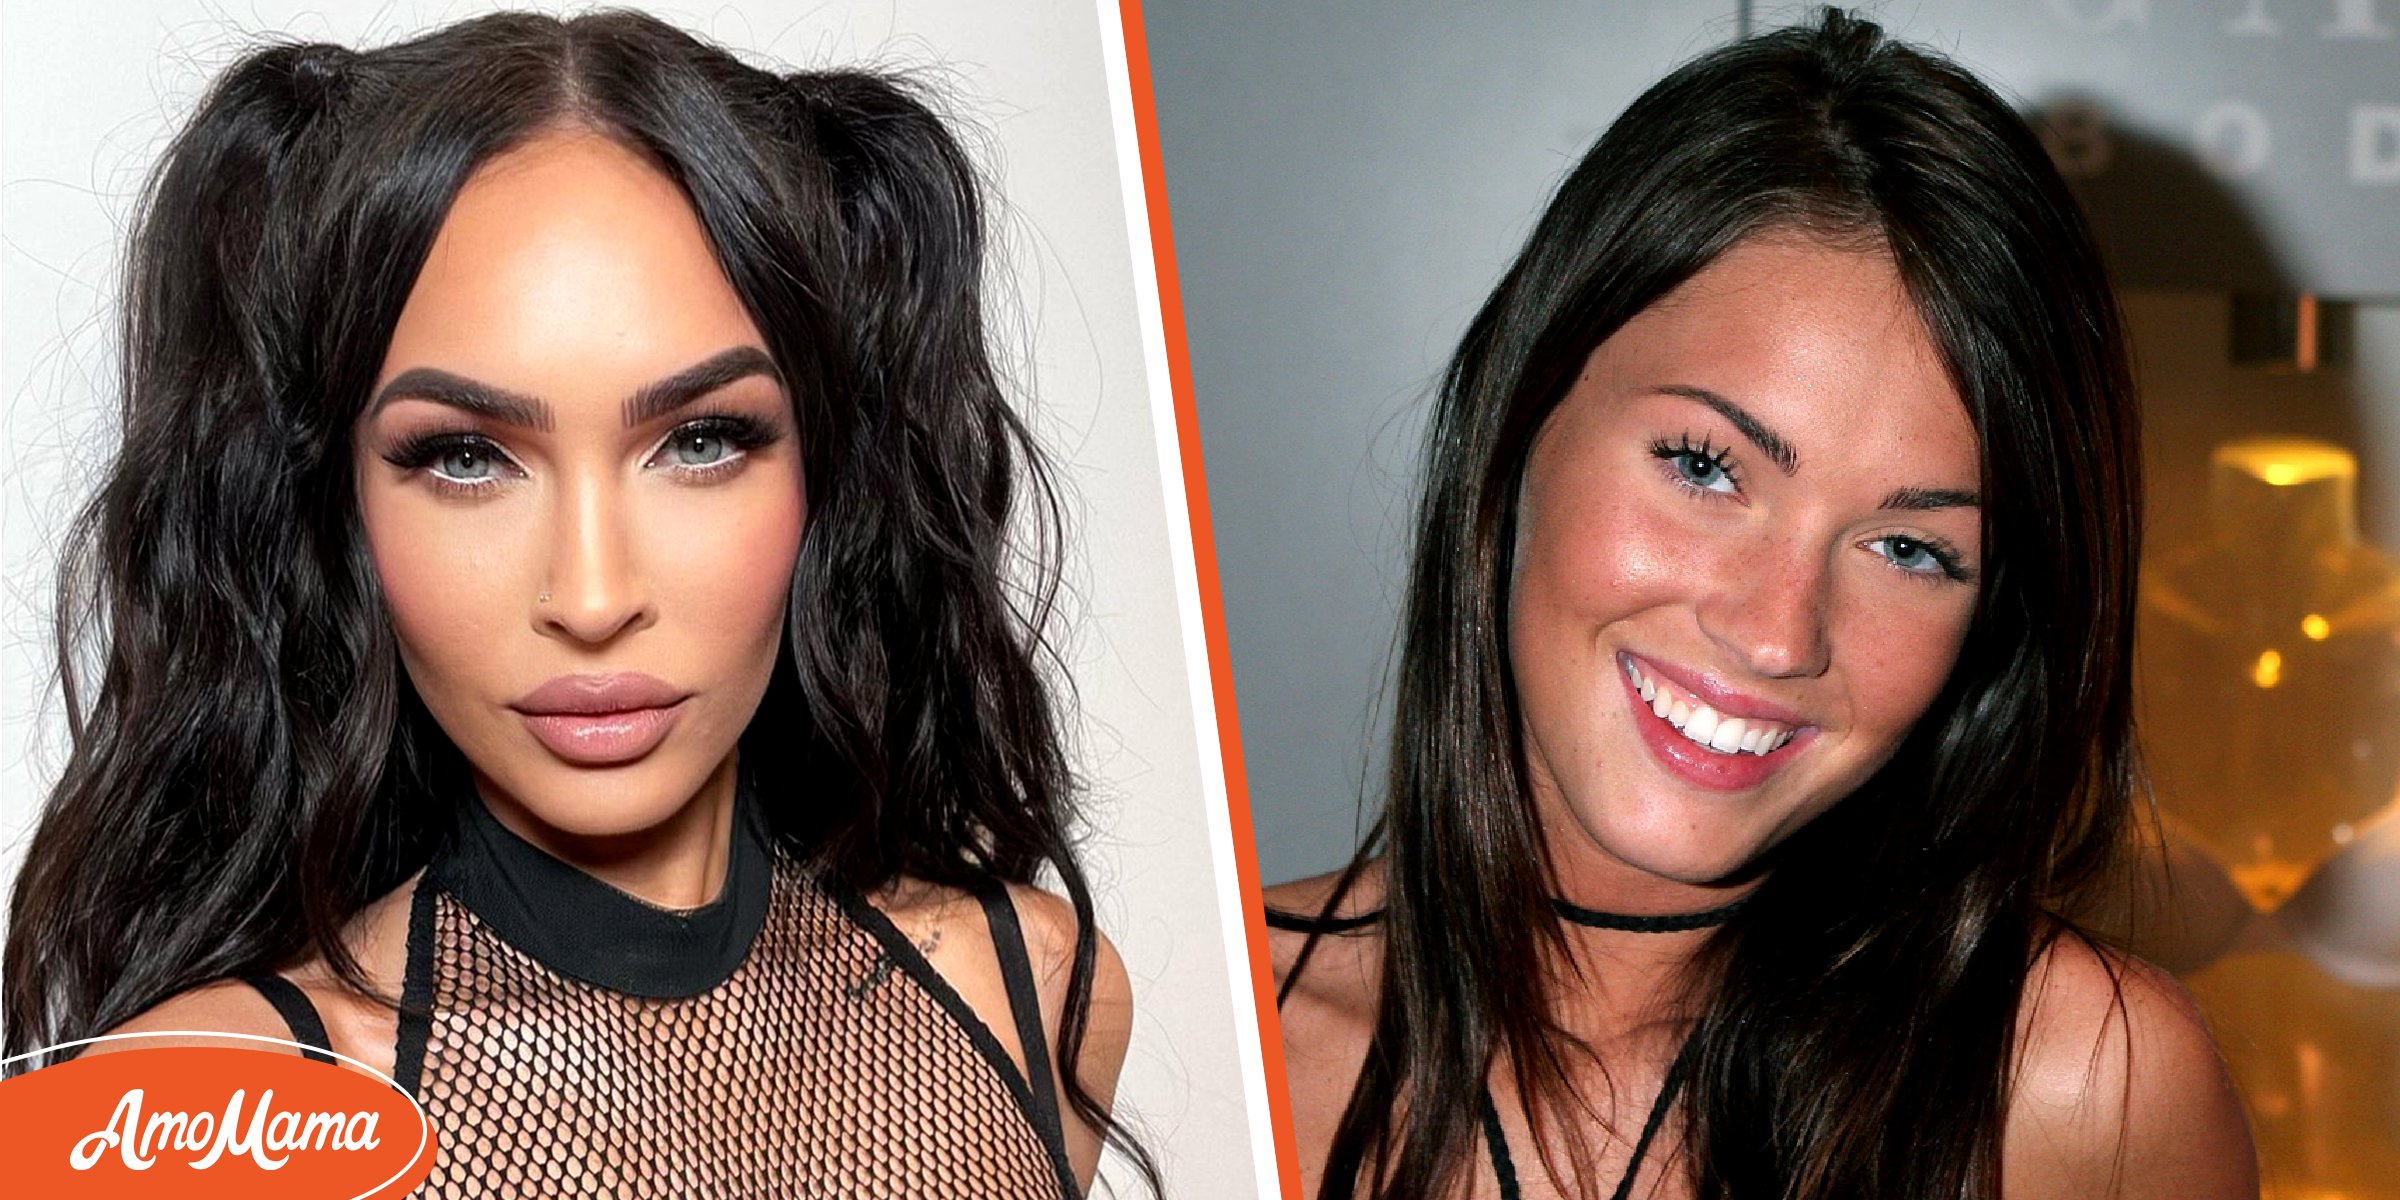 Did Megan Fox Ever Have Plastic Surgery Done? Experts Weigh In